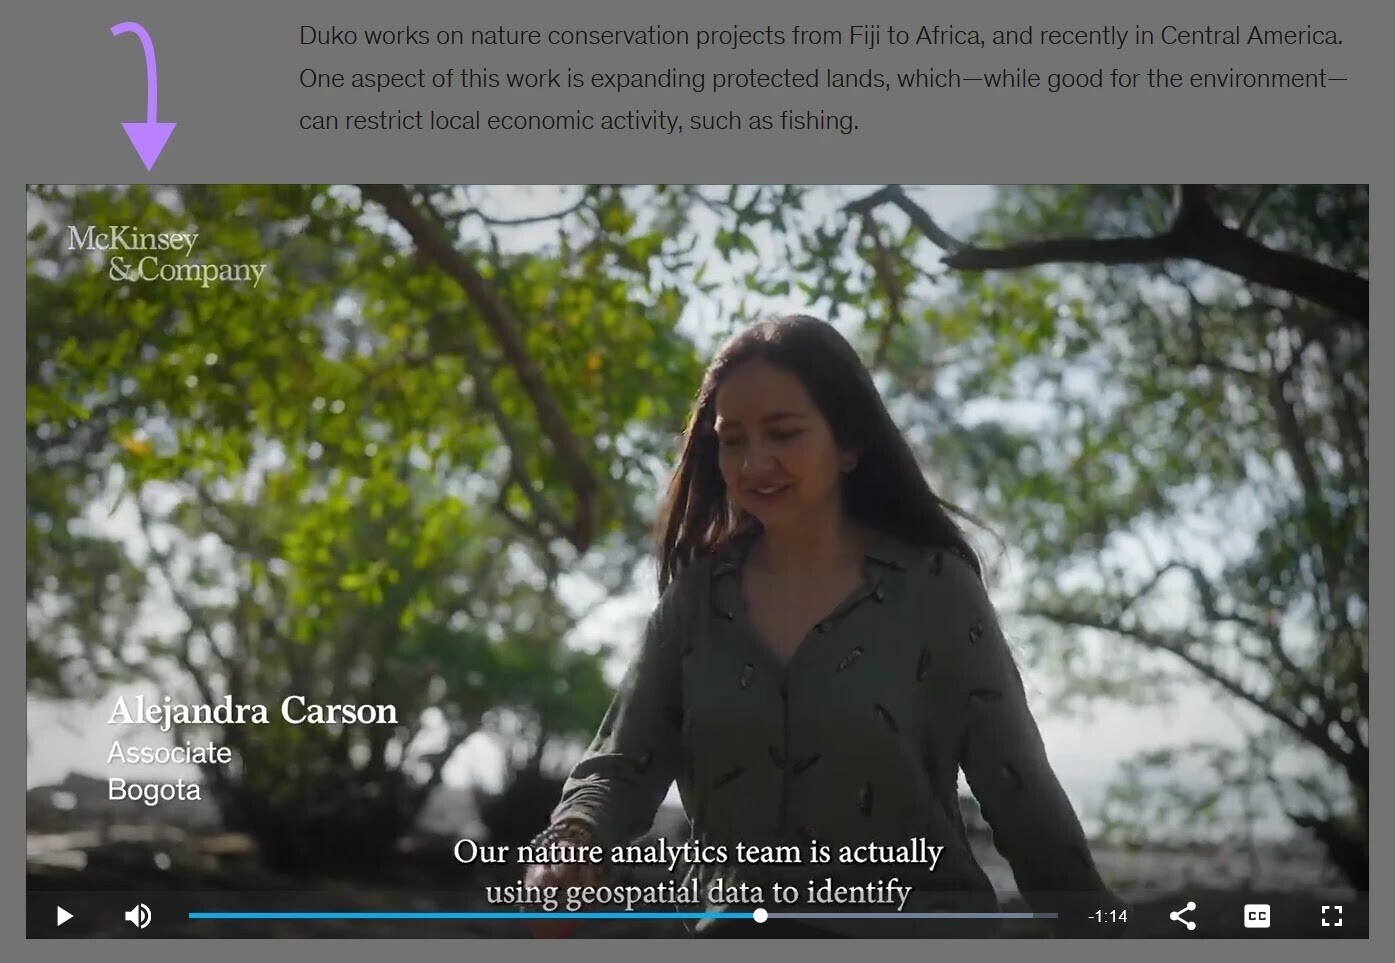 example of video on protecting ecosystems by McKinsey & Company